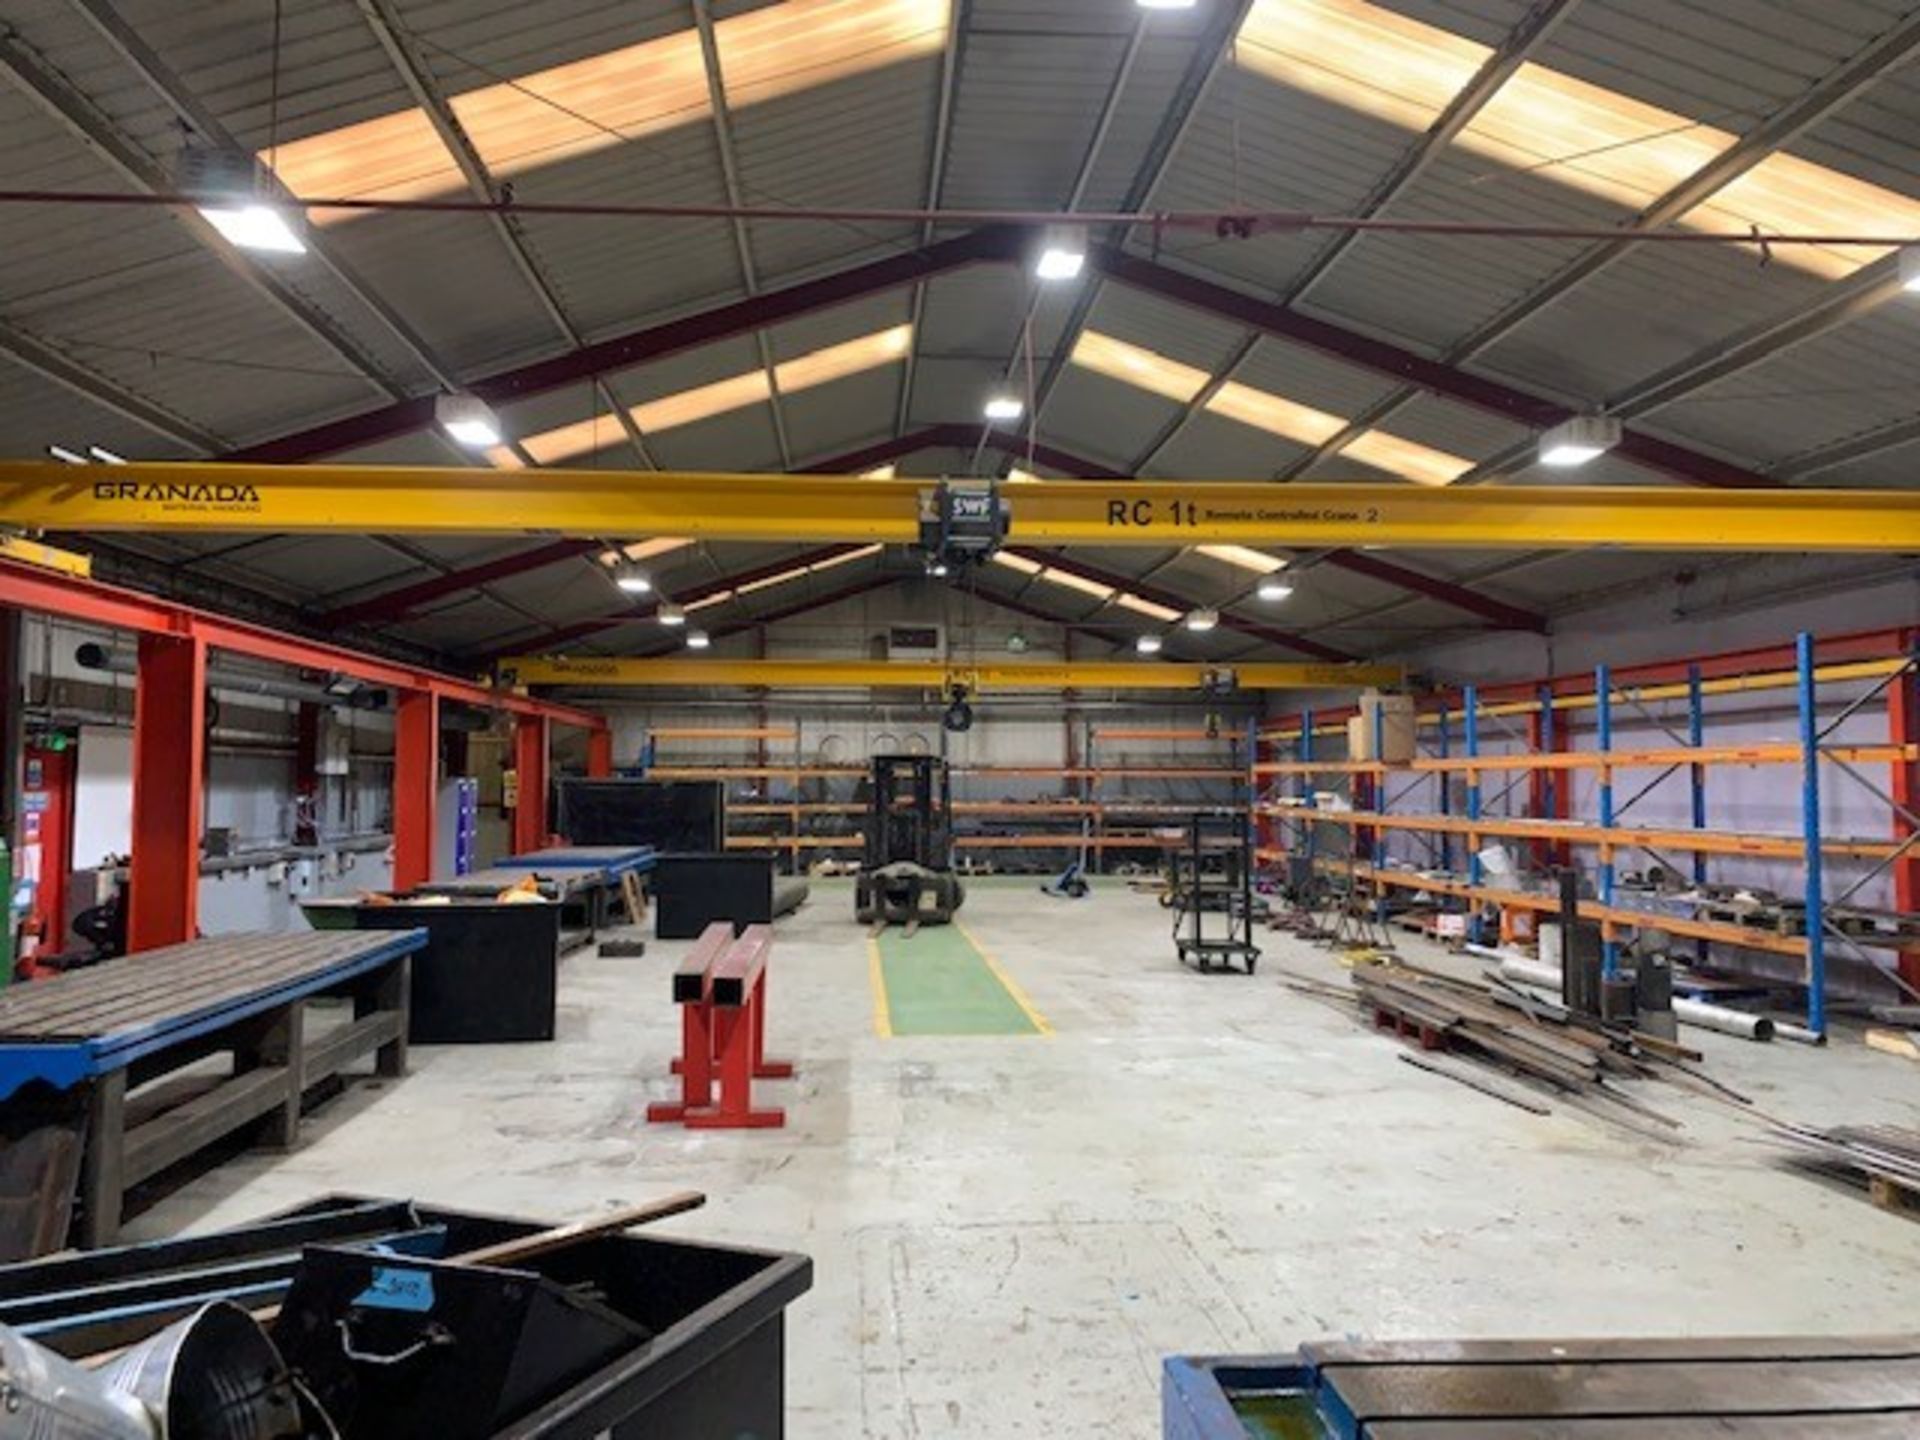 (2) Granada Model RC 1T 1 Tonne Remote Controlled Overhead Cranes (2017) 13m Span x 3.206m High on F - Image 16 of 18